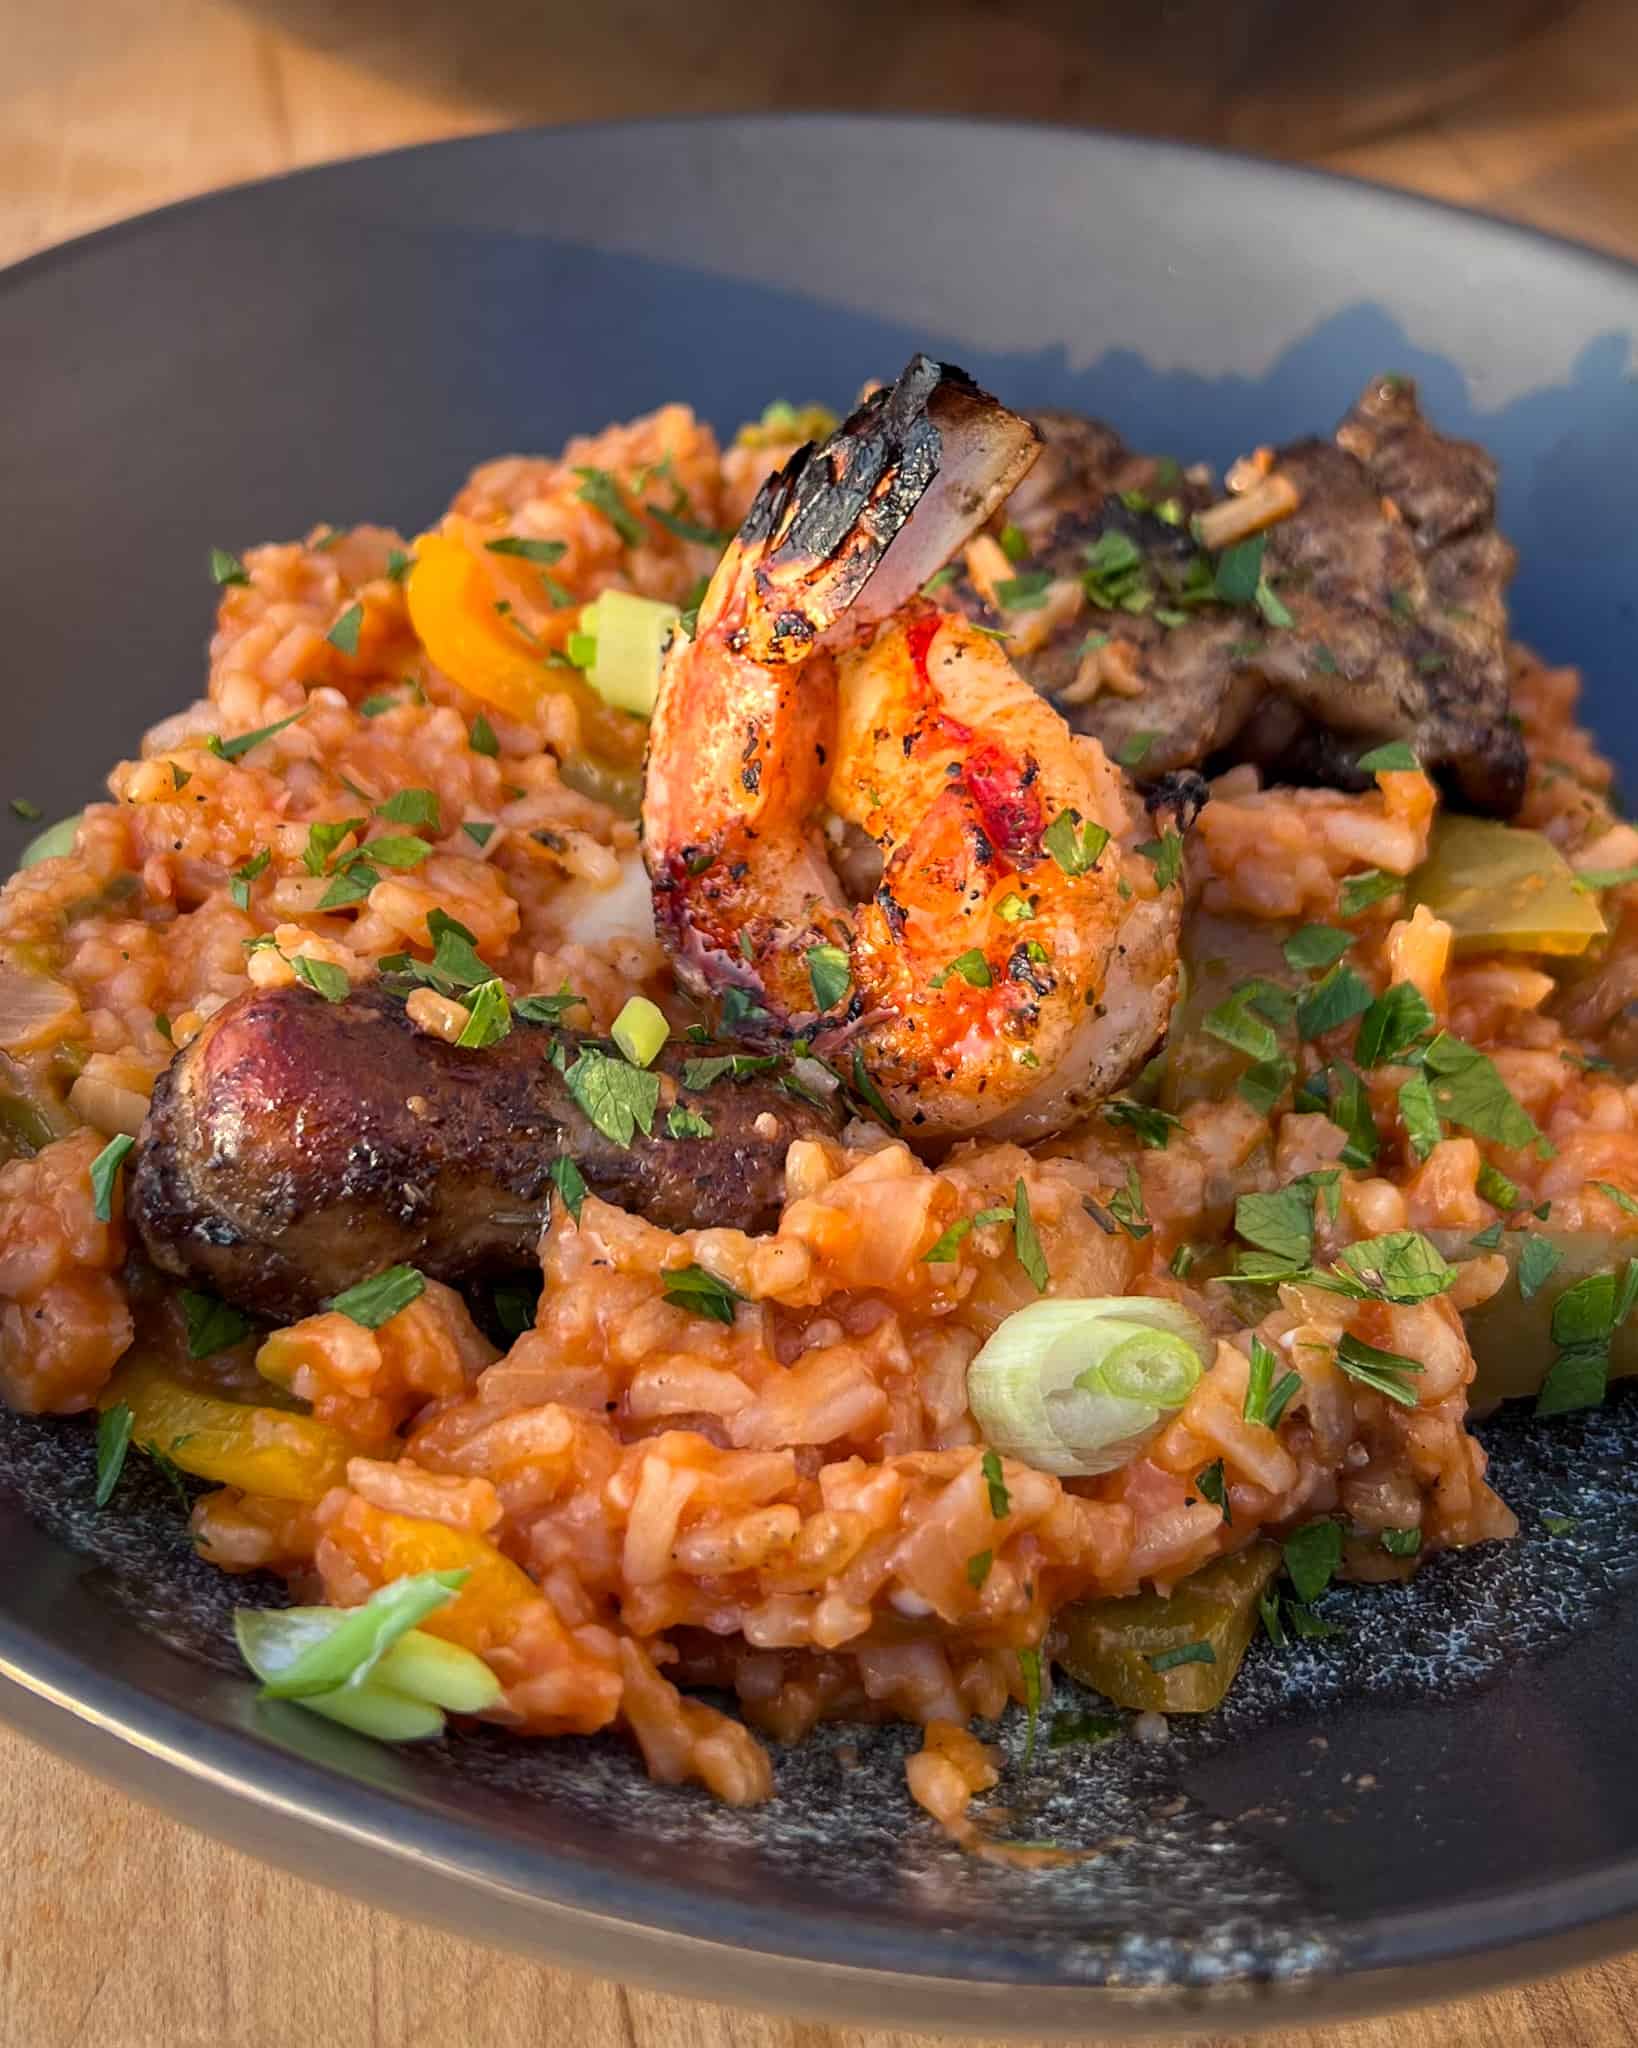 A bowl of grilled jambalaya with grilled shrimp, chicken and sausage.